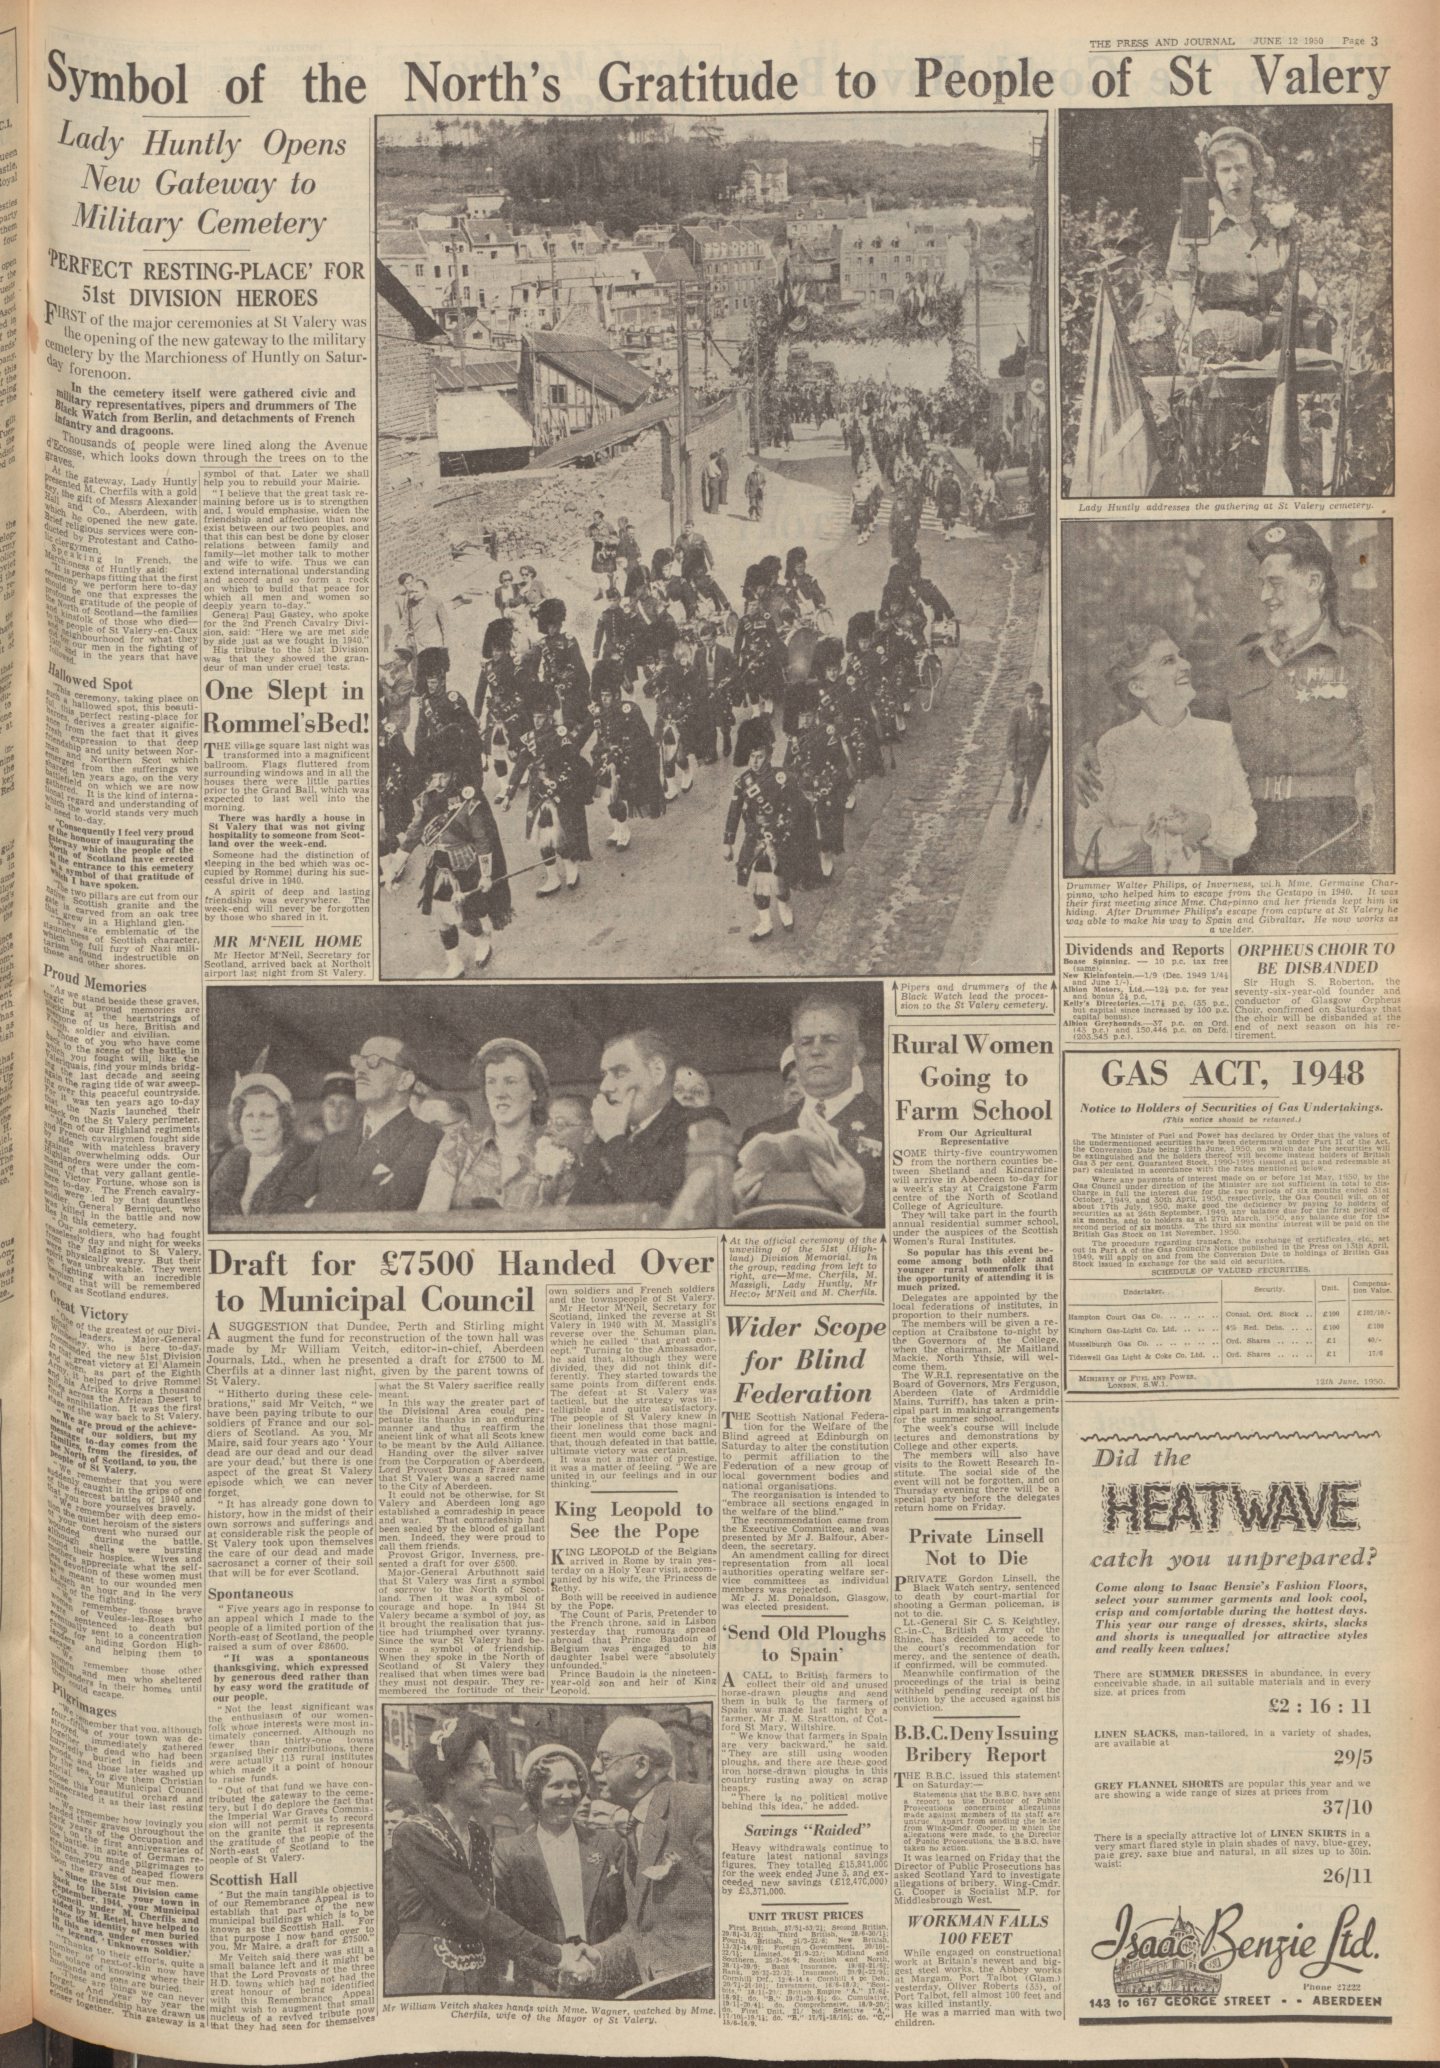 Newspaper frontpage featuring articles about remembrance of the 51st Highlander Division in St Valery-en-Caux 